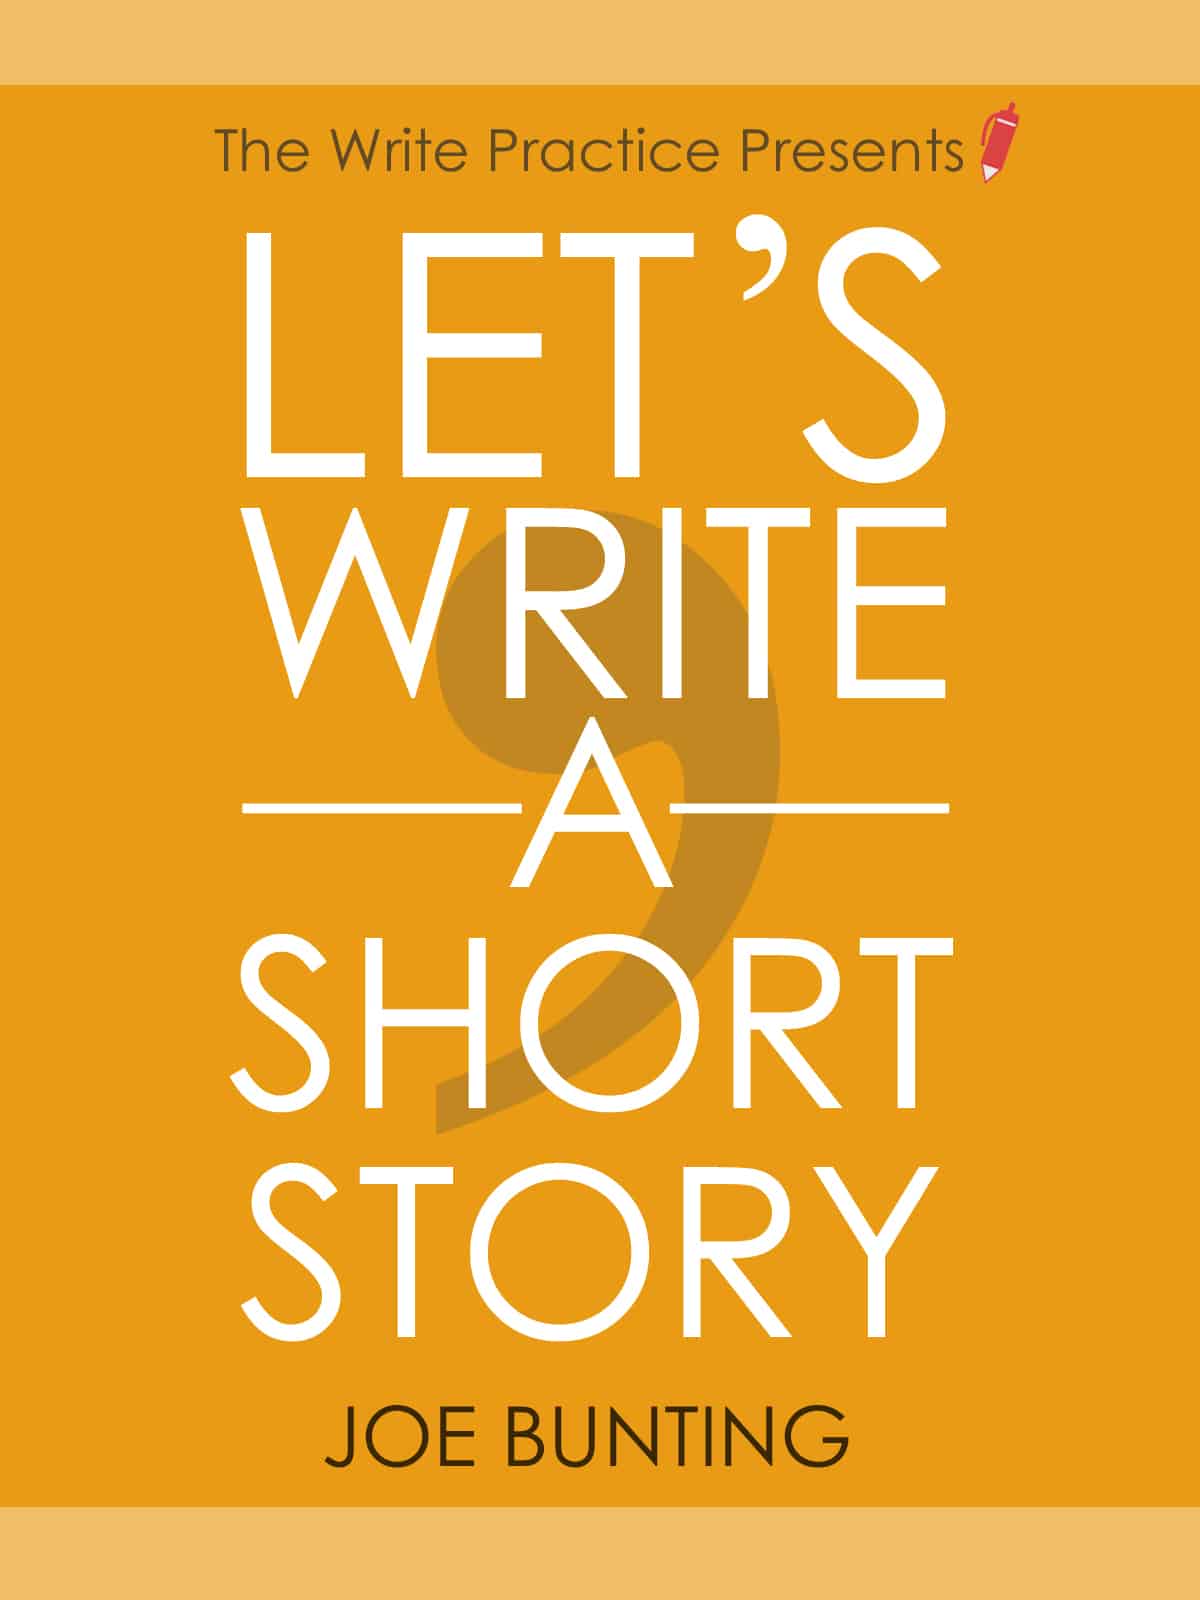 writing stories is